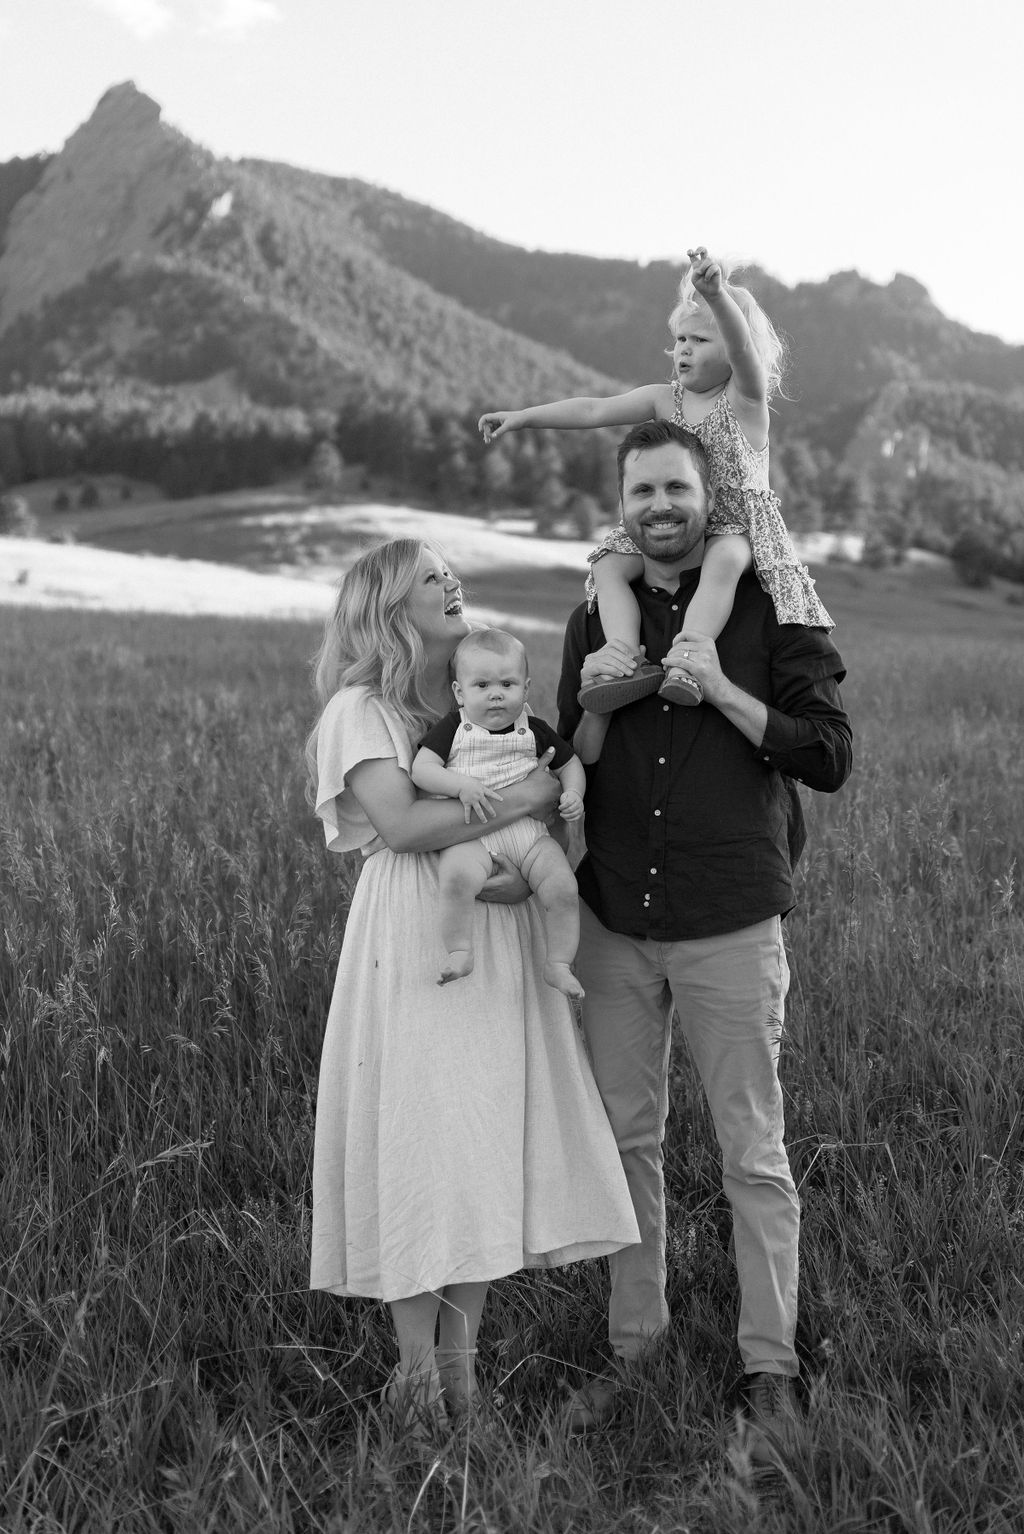 Sweet summer family photo session taken at chautauqua park in boulder colorado